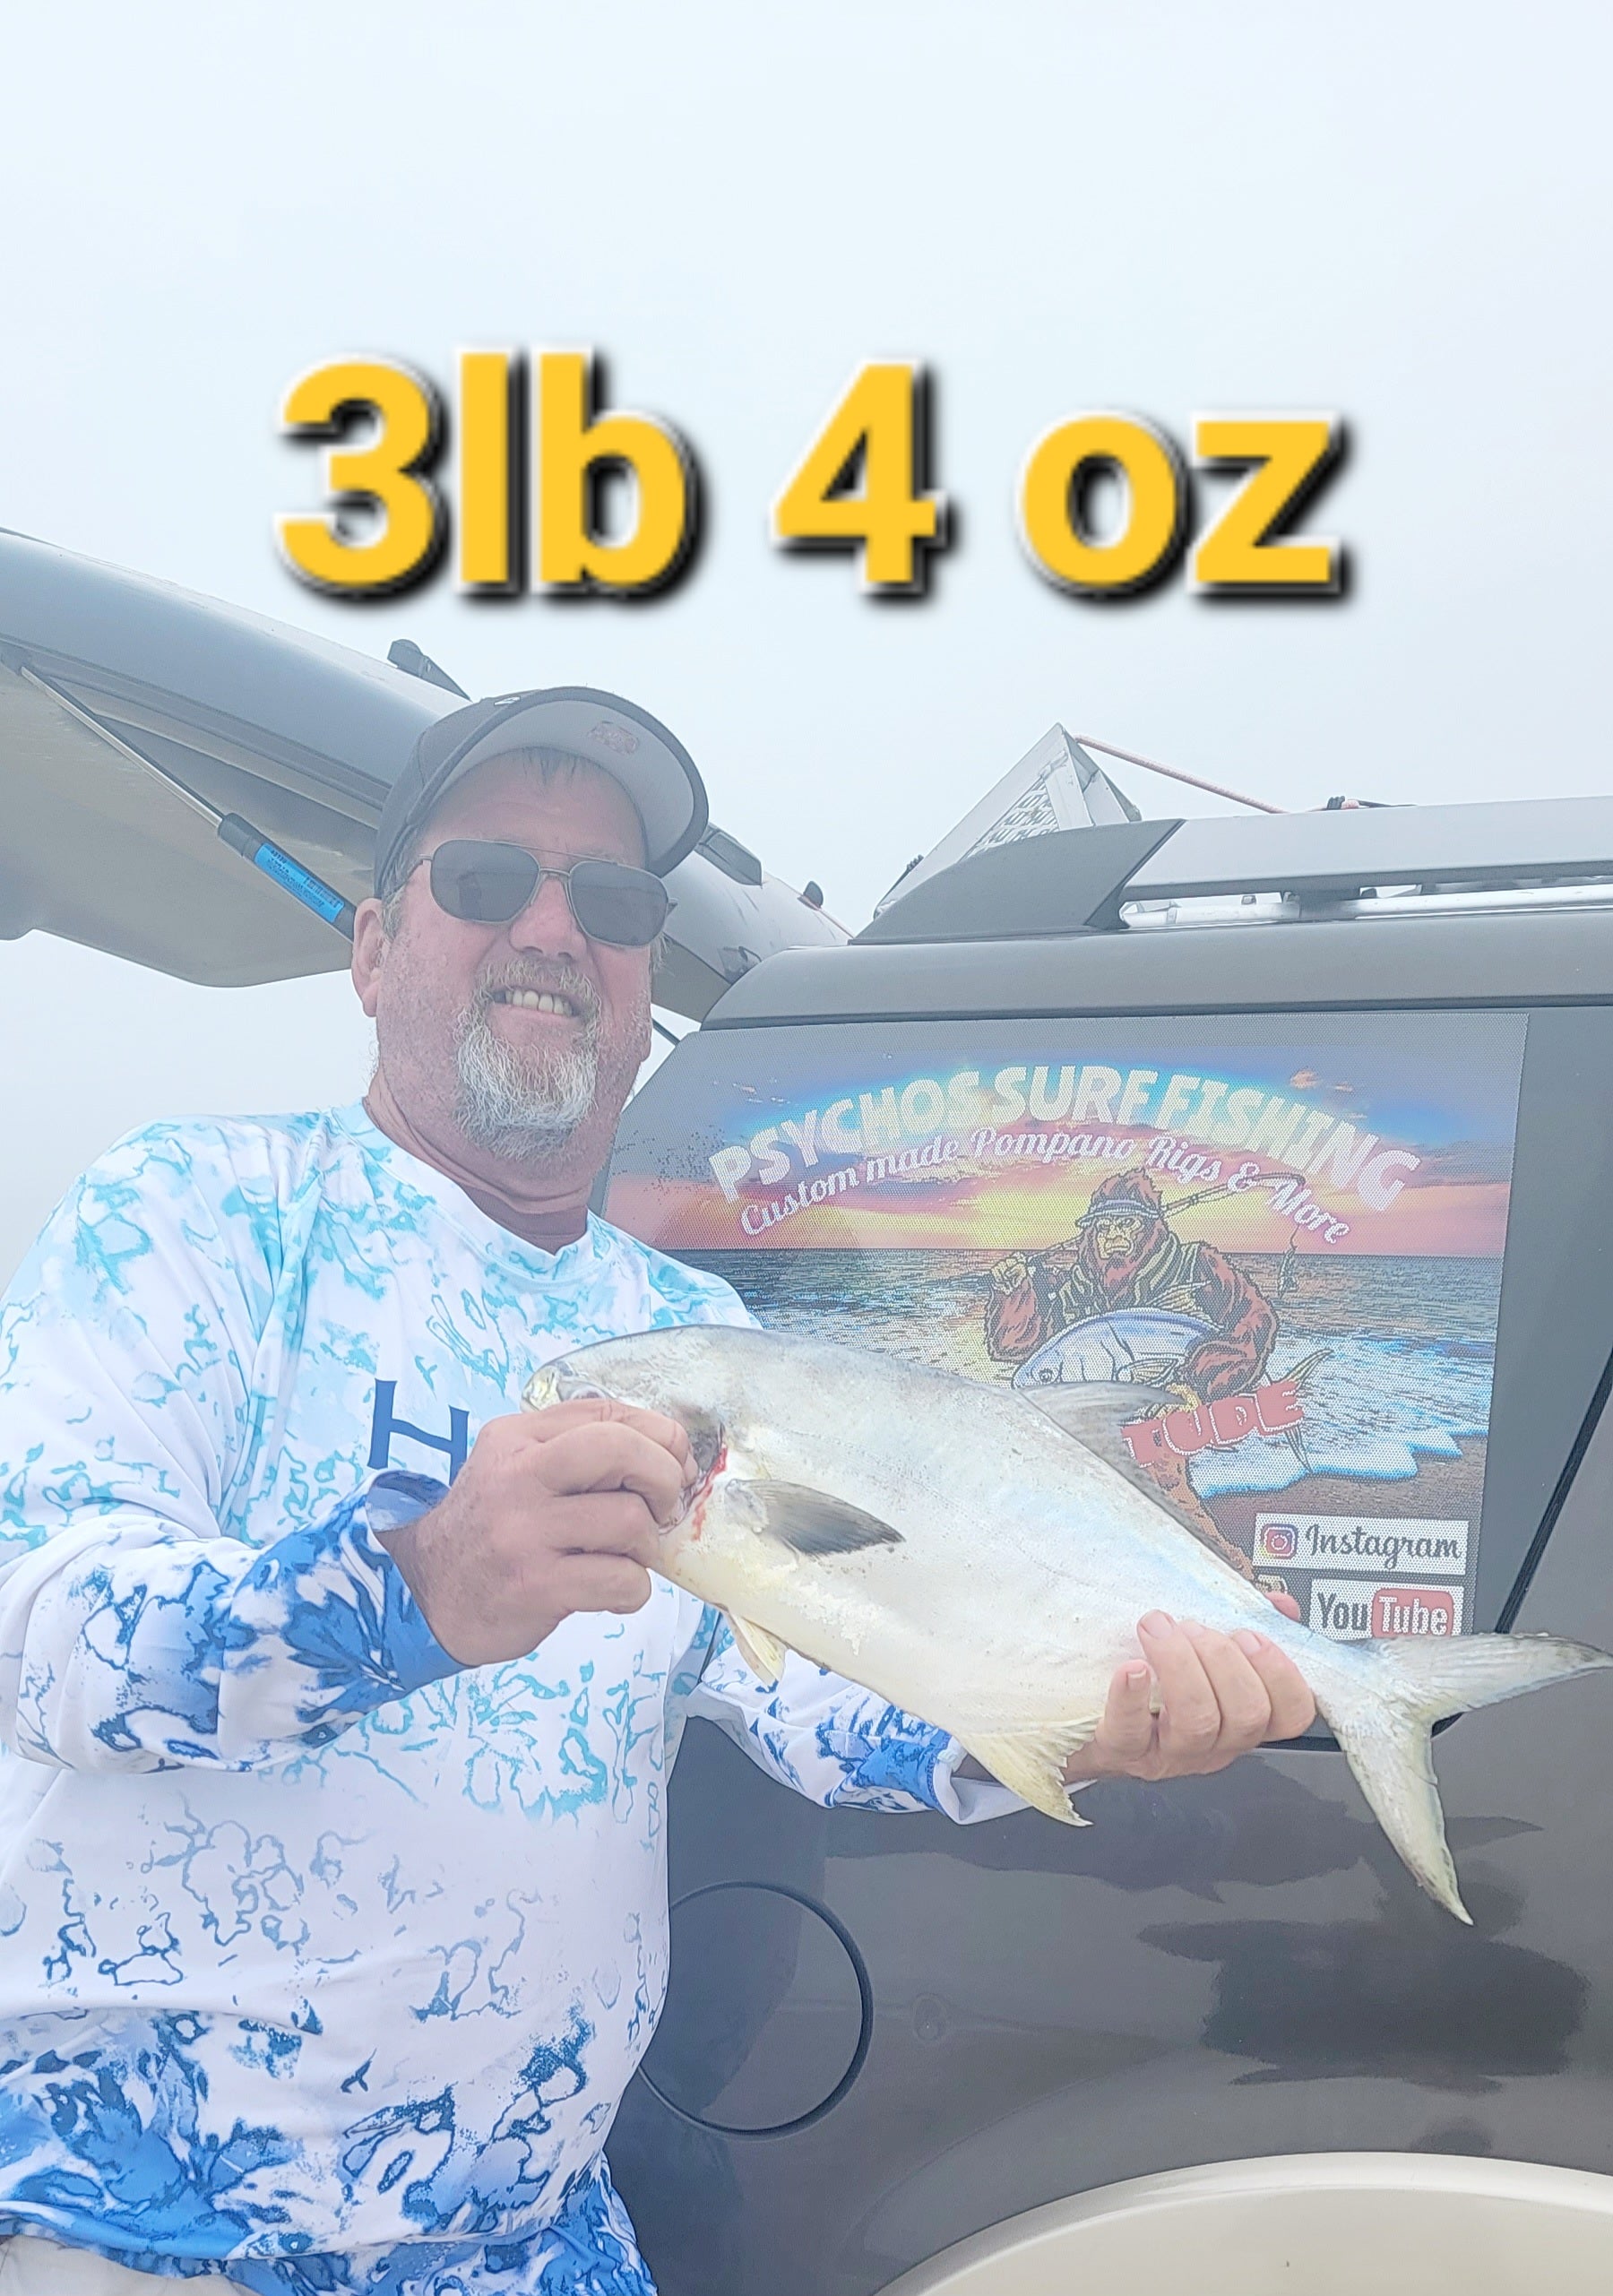 GOLD 'n' EGGs Pompano Rig – Psycho's Surf Fishing Rigs & More